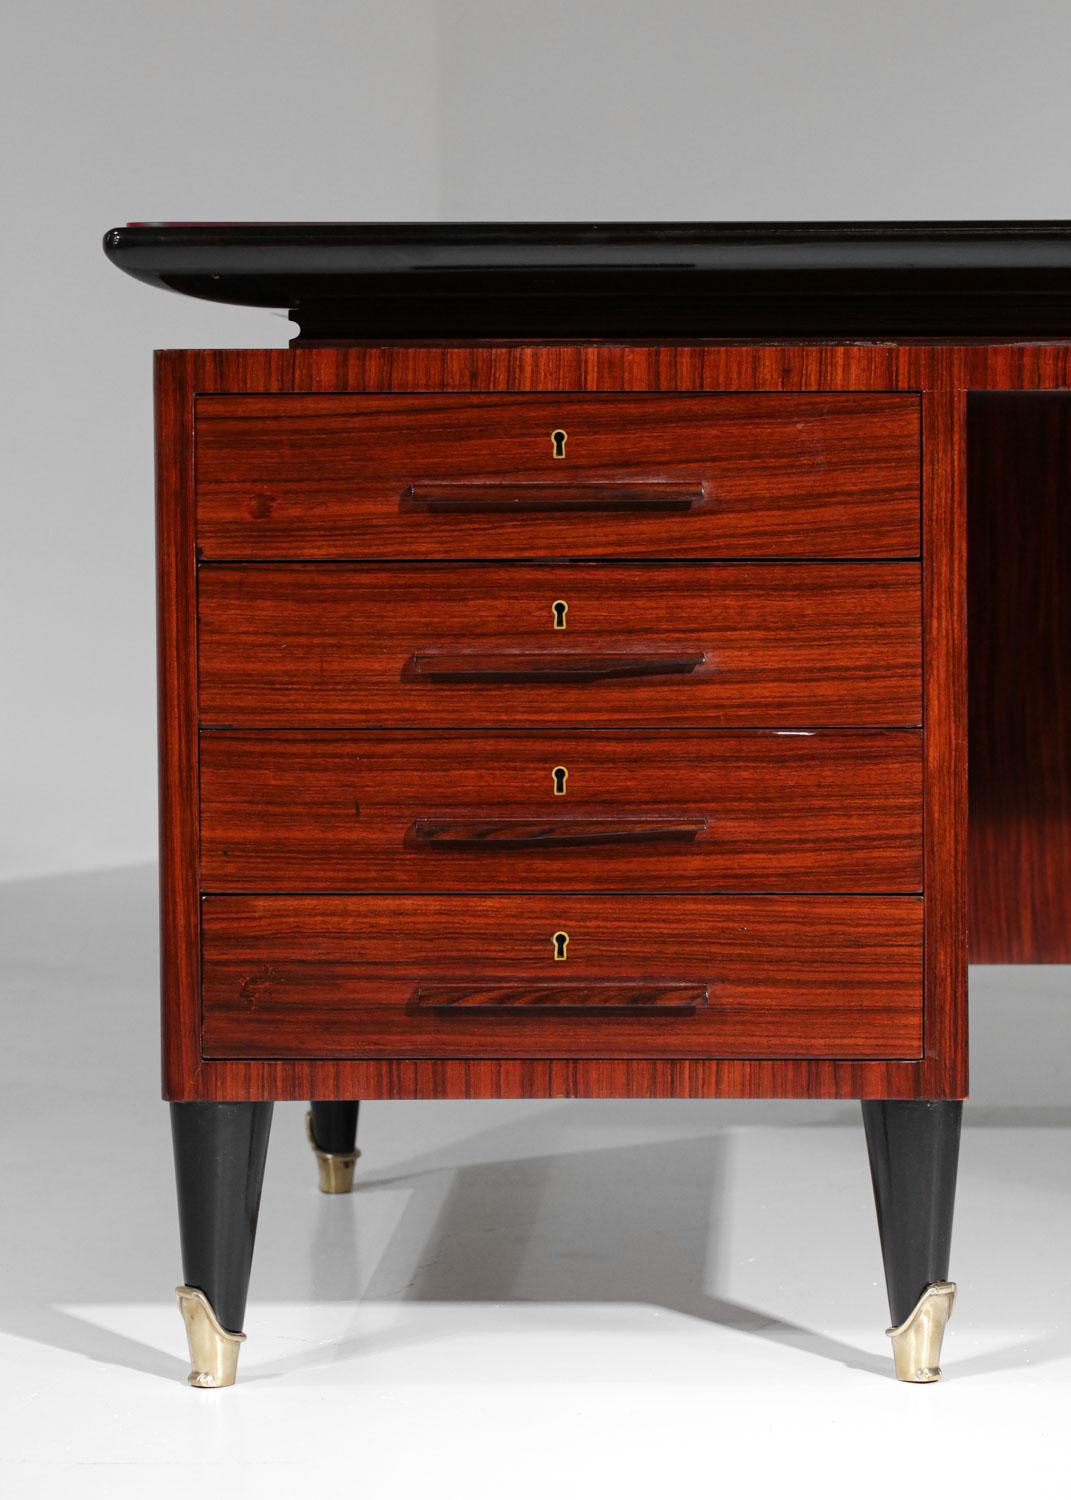 Italian large Desk by Vittorio Dassi solid wood and glass 60s - G725 For Sale 3